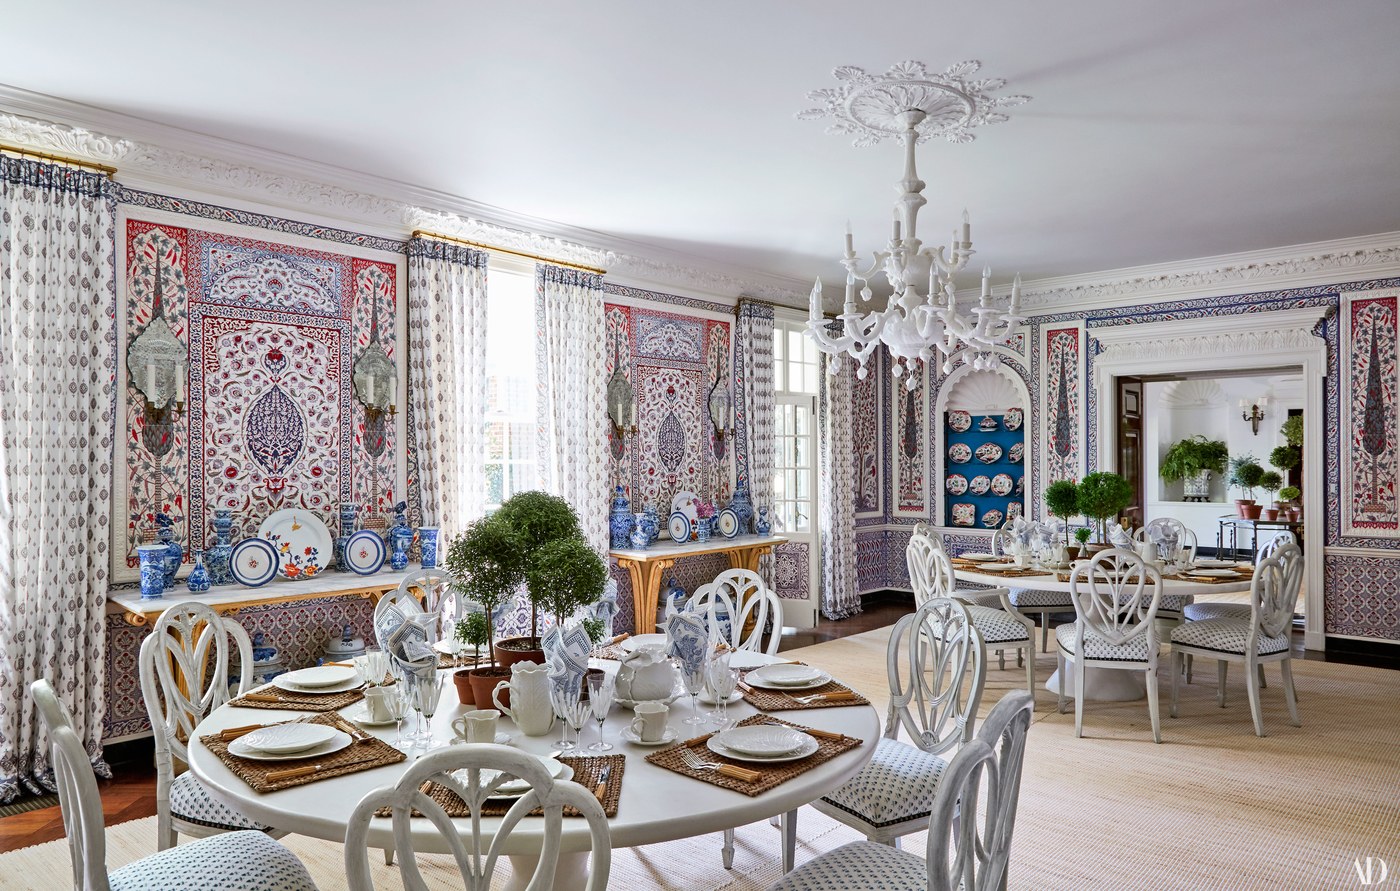 Tory Burch's dining room in her Southampton home. Iksel decorative arts on the walls